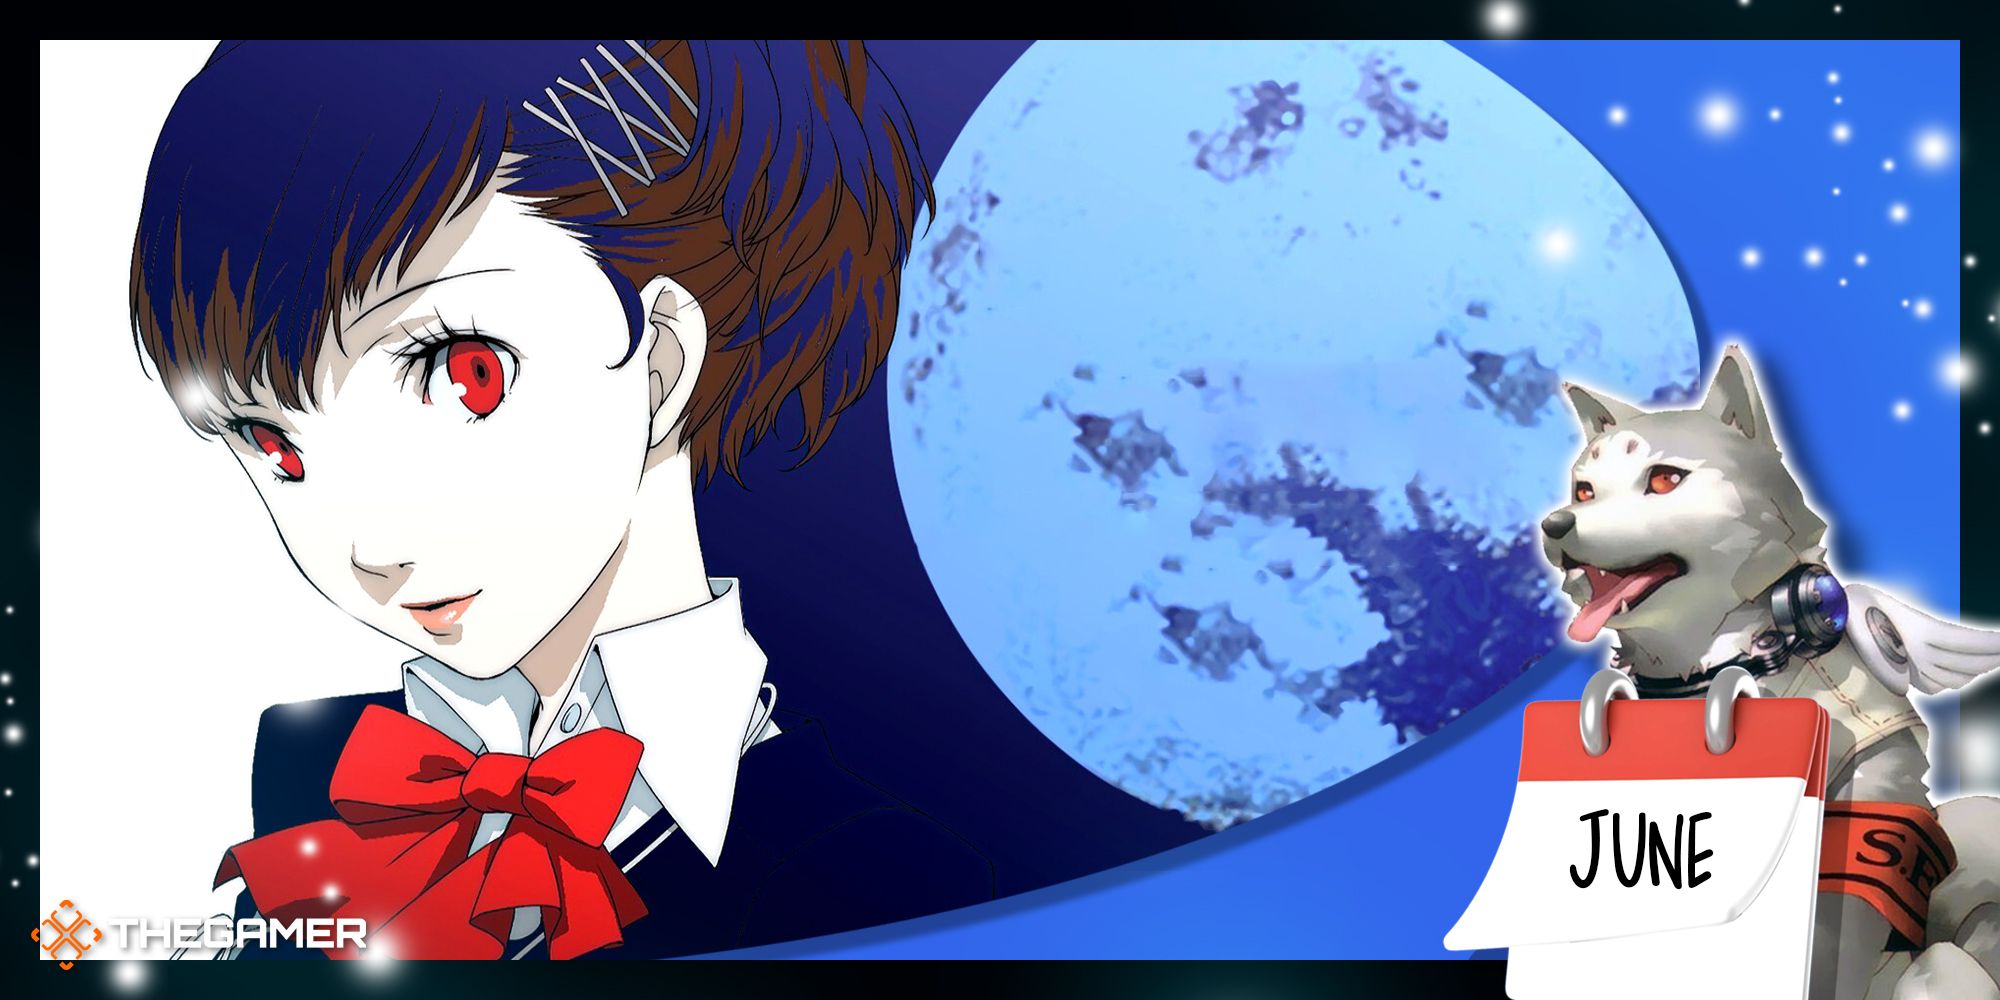 the female protagonist of persona 3 portable with the full moon in our blue p3p koromaru frame, with koromaru wearing a calendar displaying the month of june for persona 3 portable